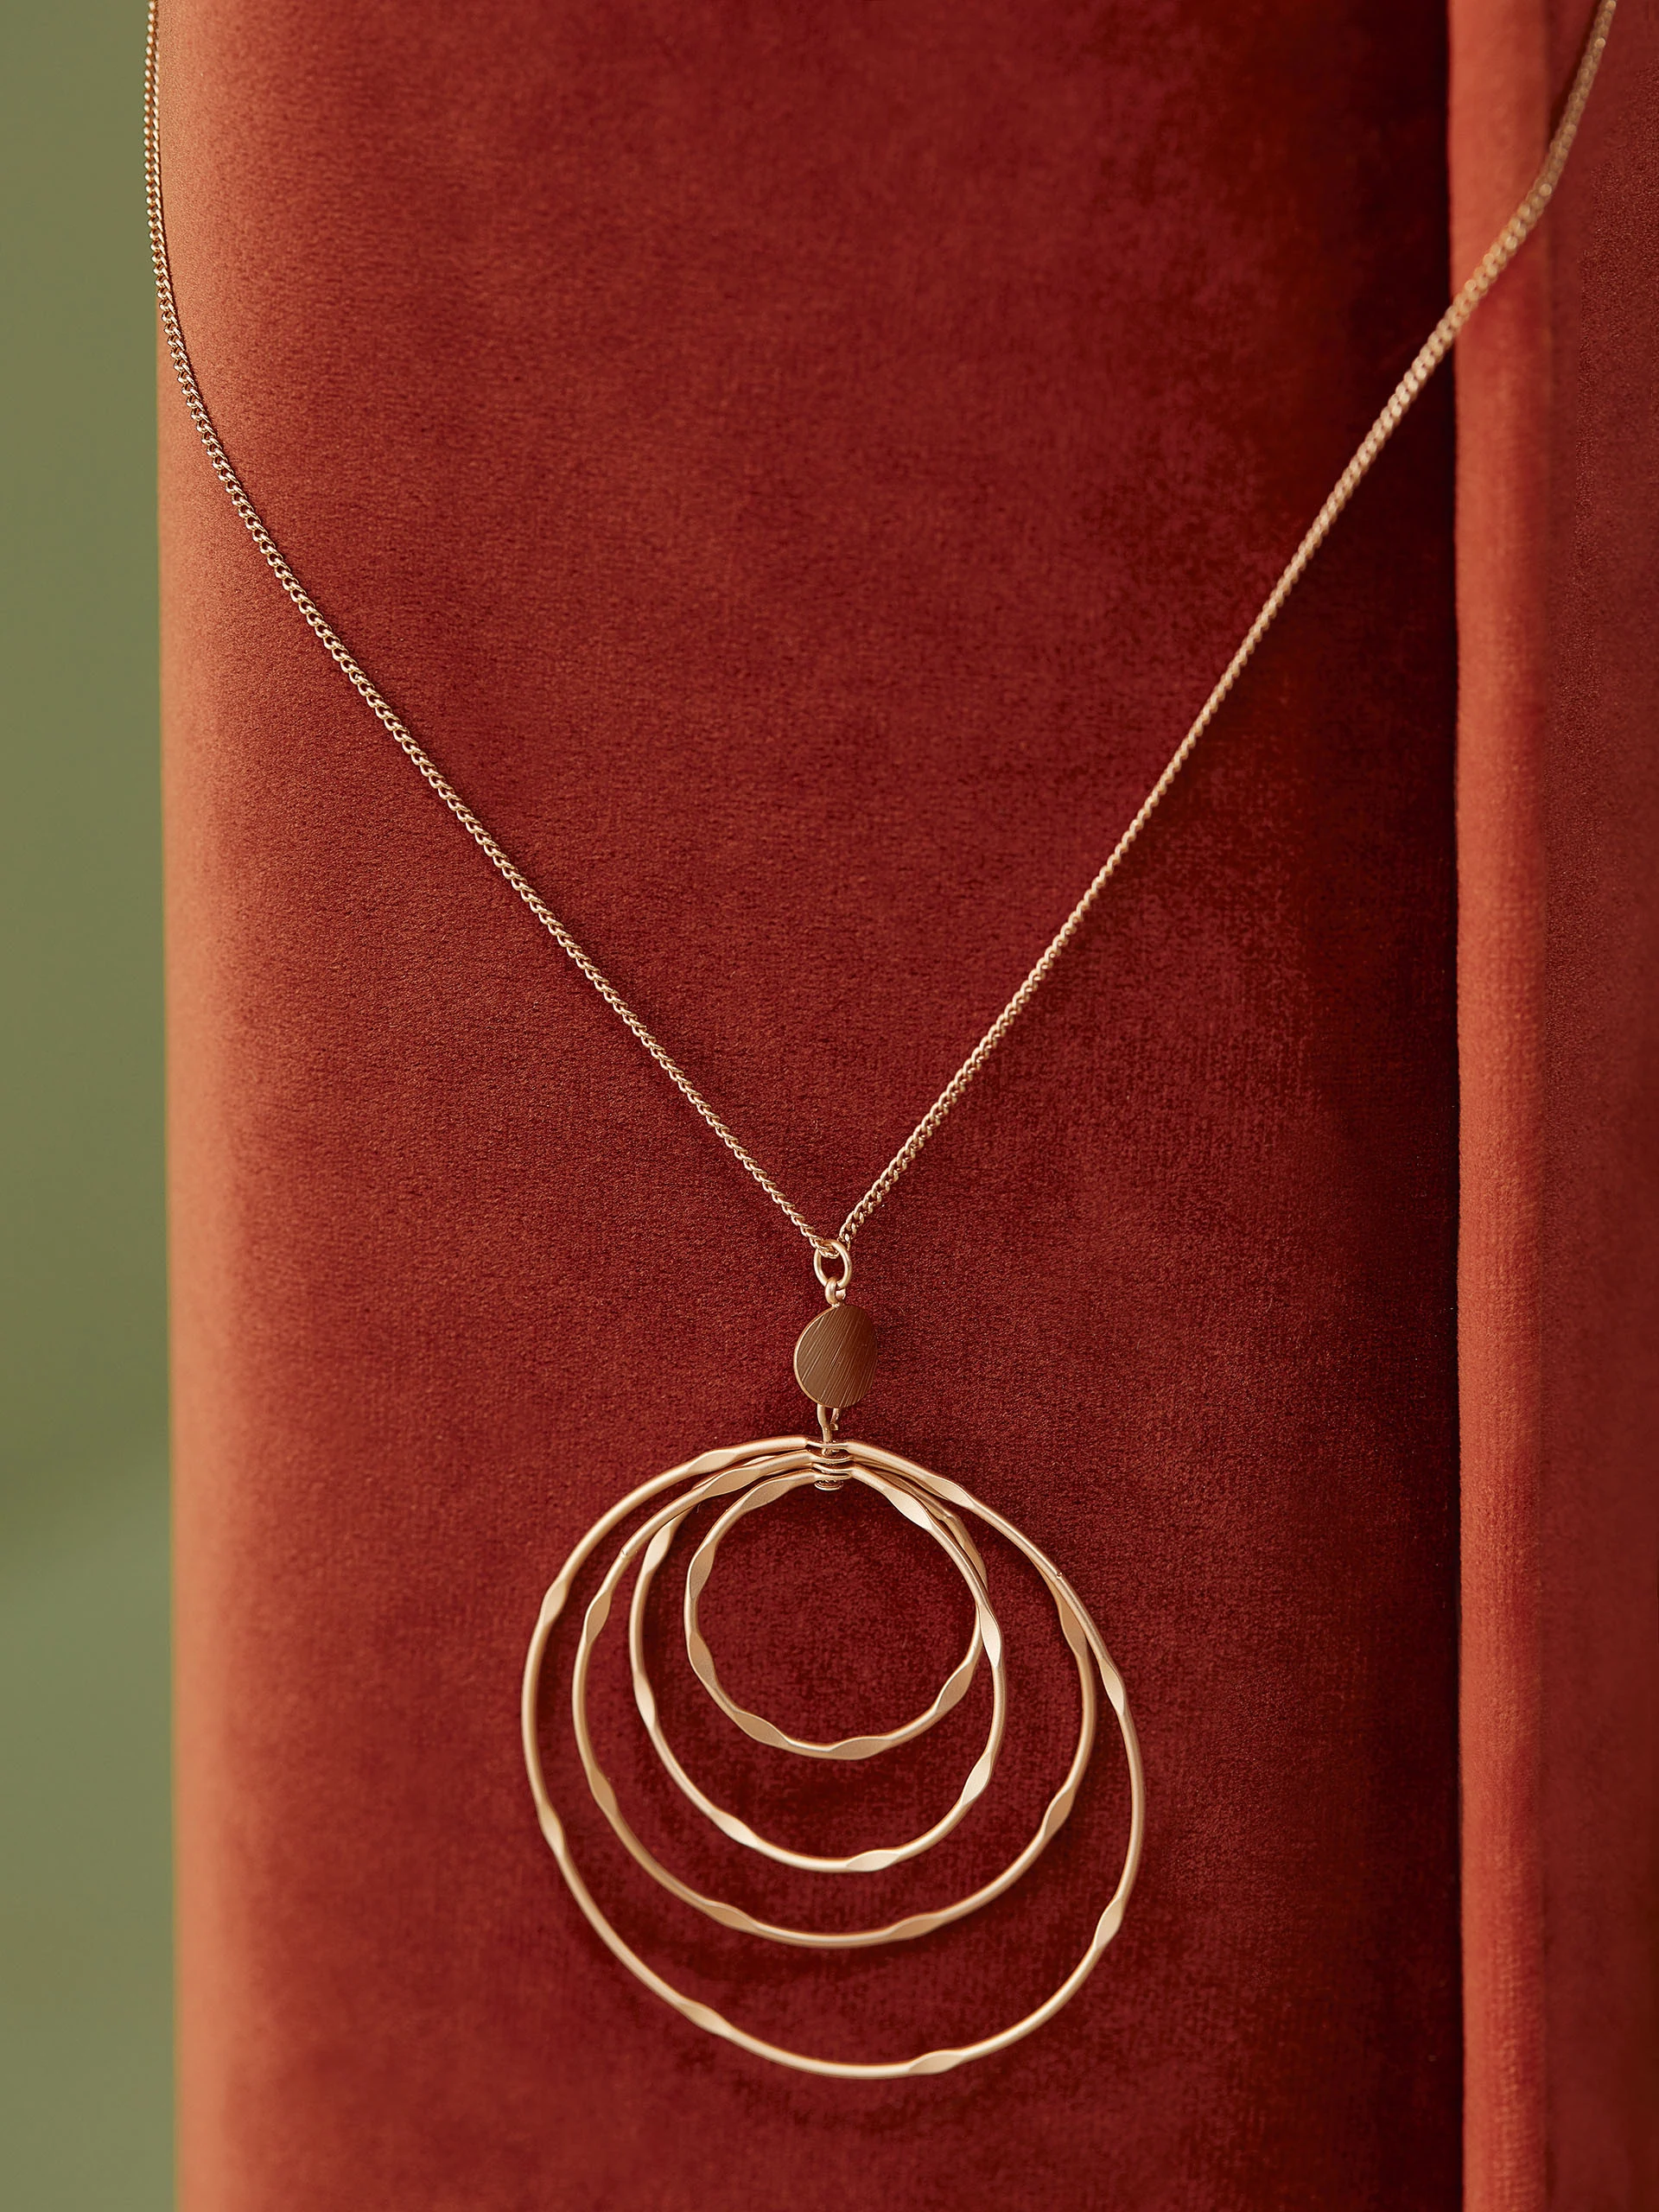 GOLD PLATED NECKLACE WITH A CIRCLE